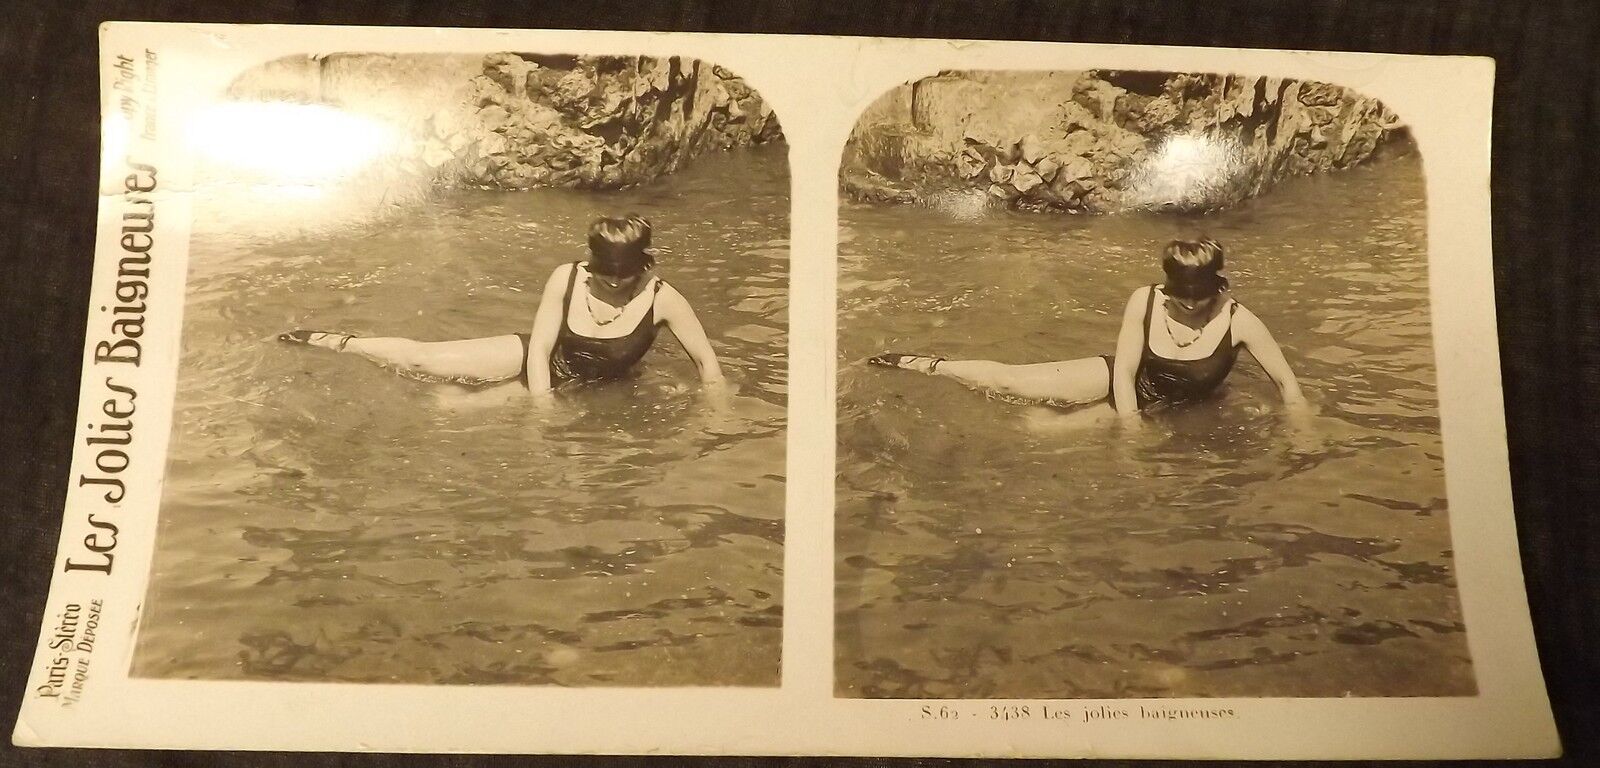 PHOTO PARIS STEREO LES JOLIES BATHEUSES LADY N°4 in the water